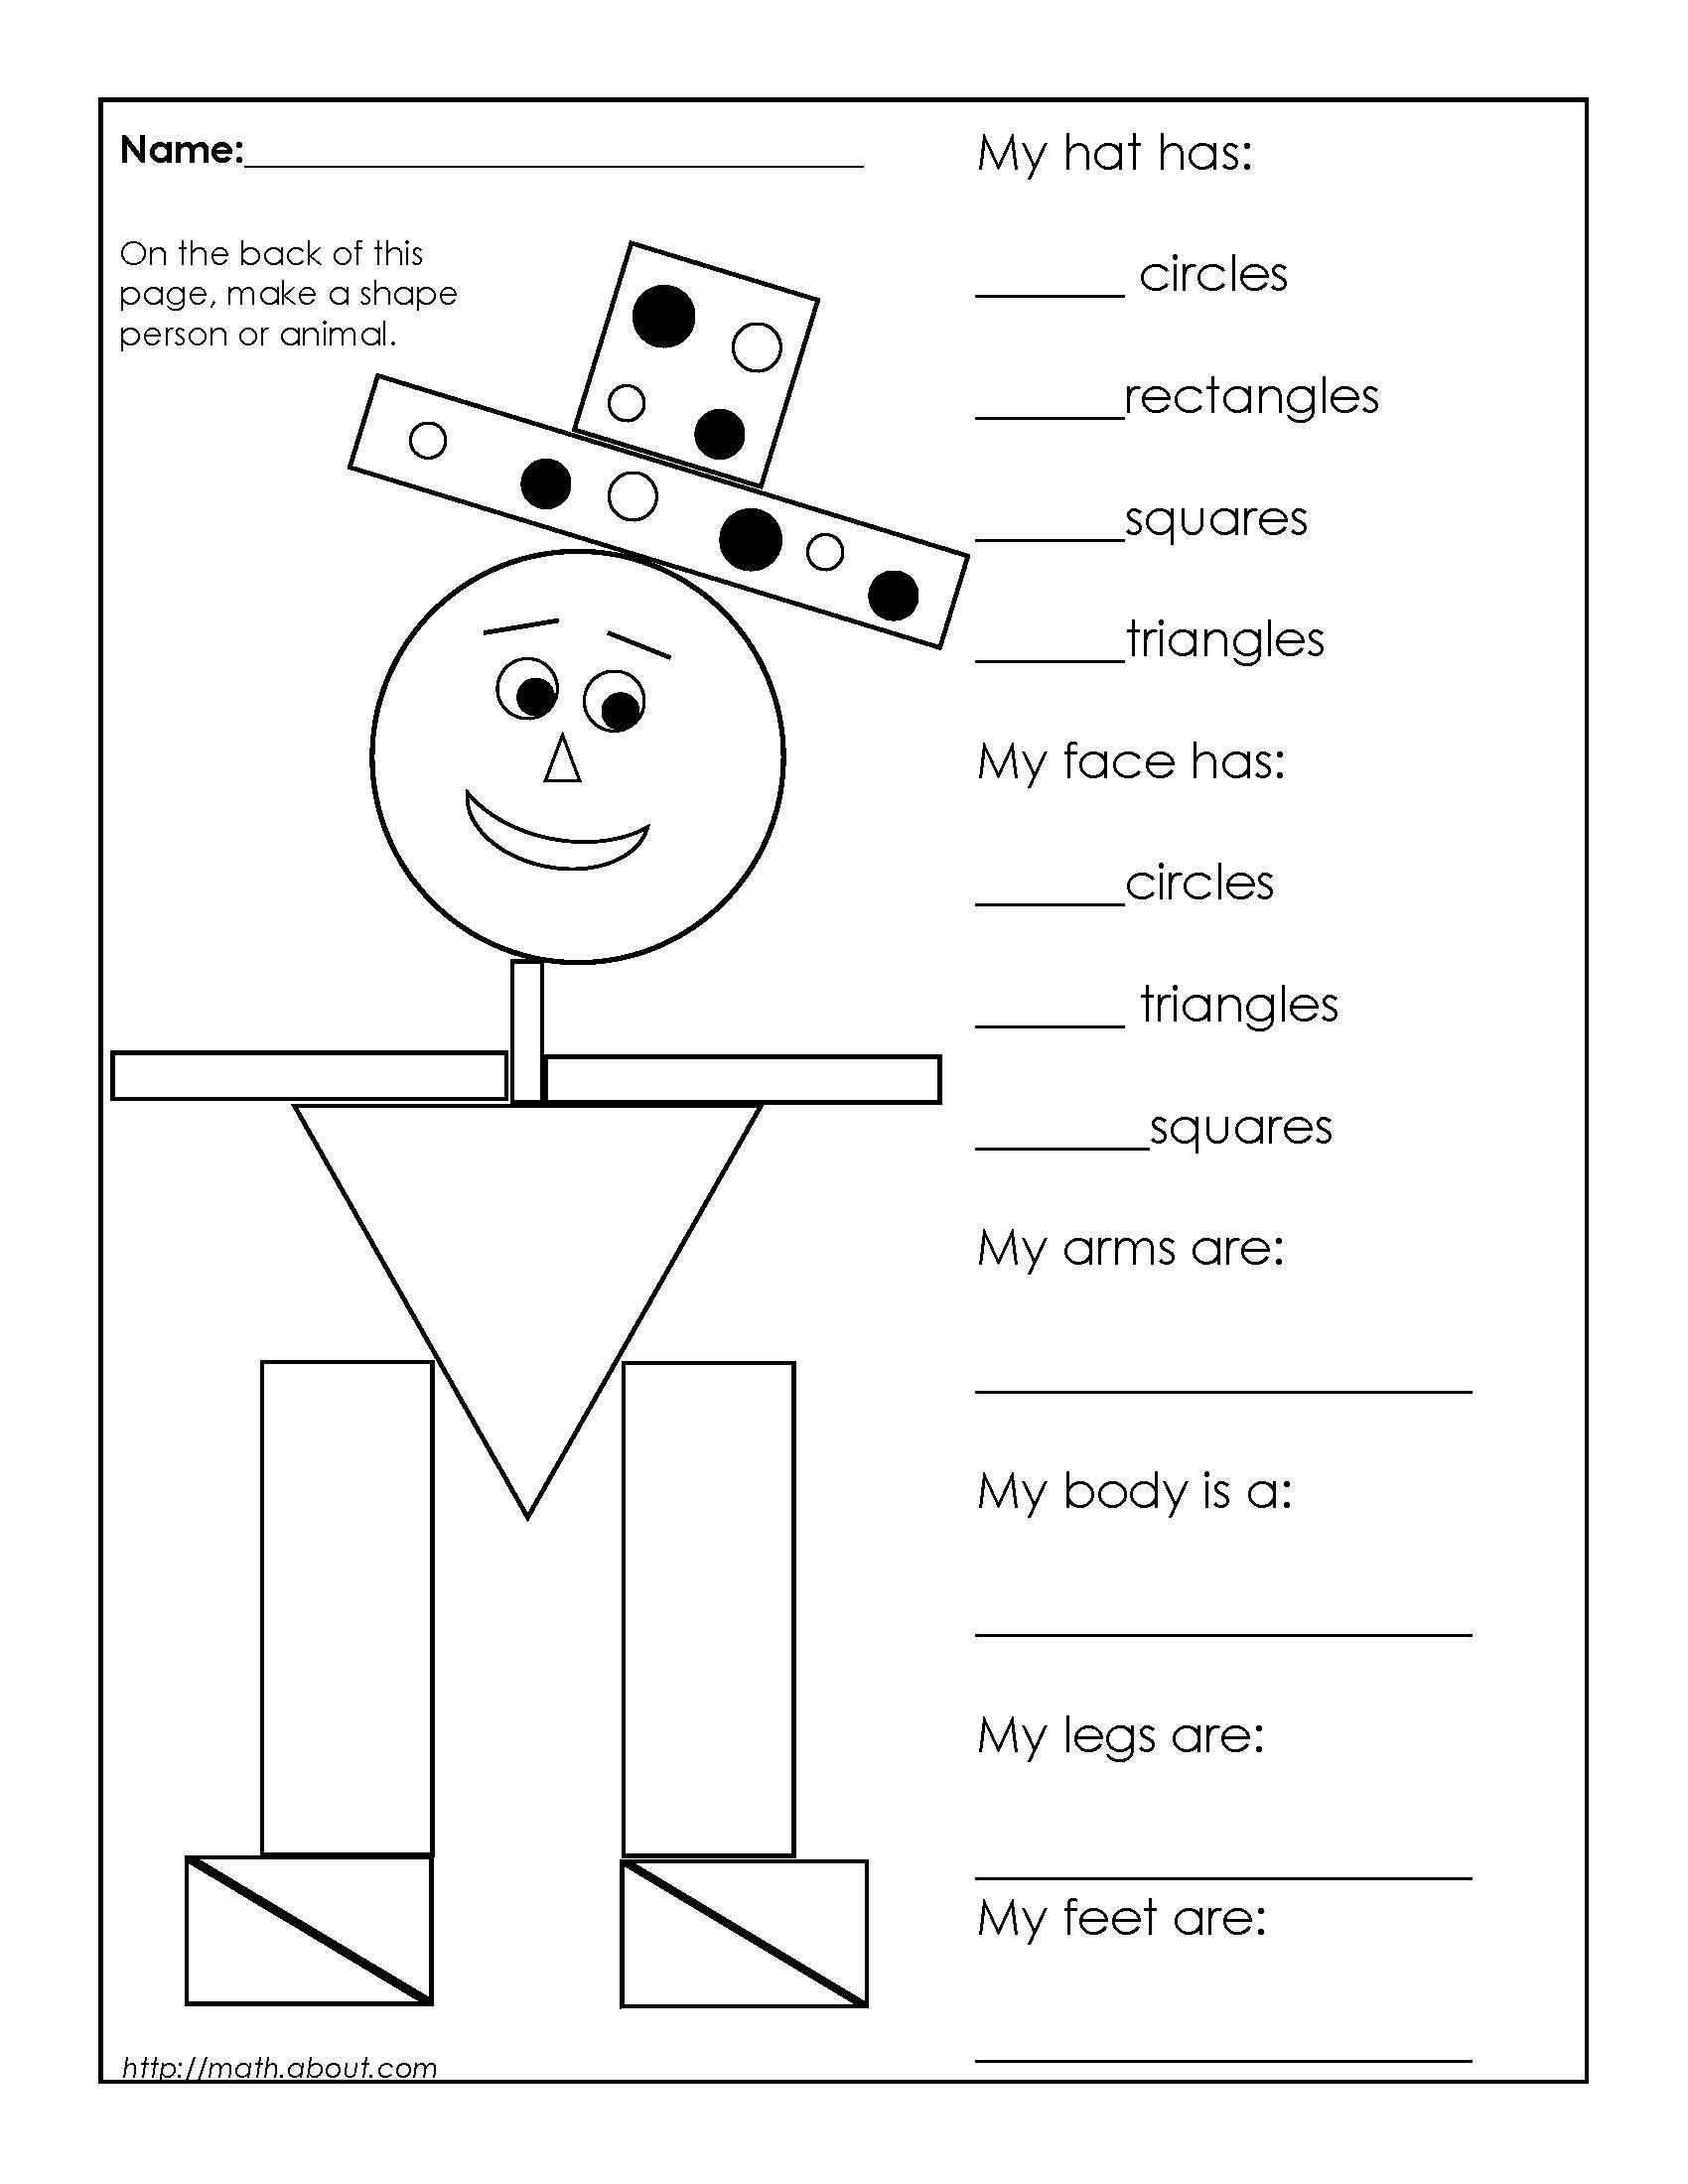 Arithmetic Sequences and Series Worksheet or 1st Grade Geometry Worksheets for Students